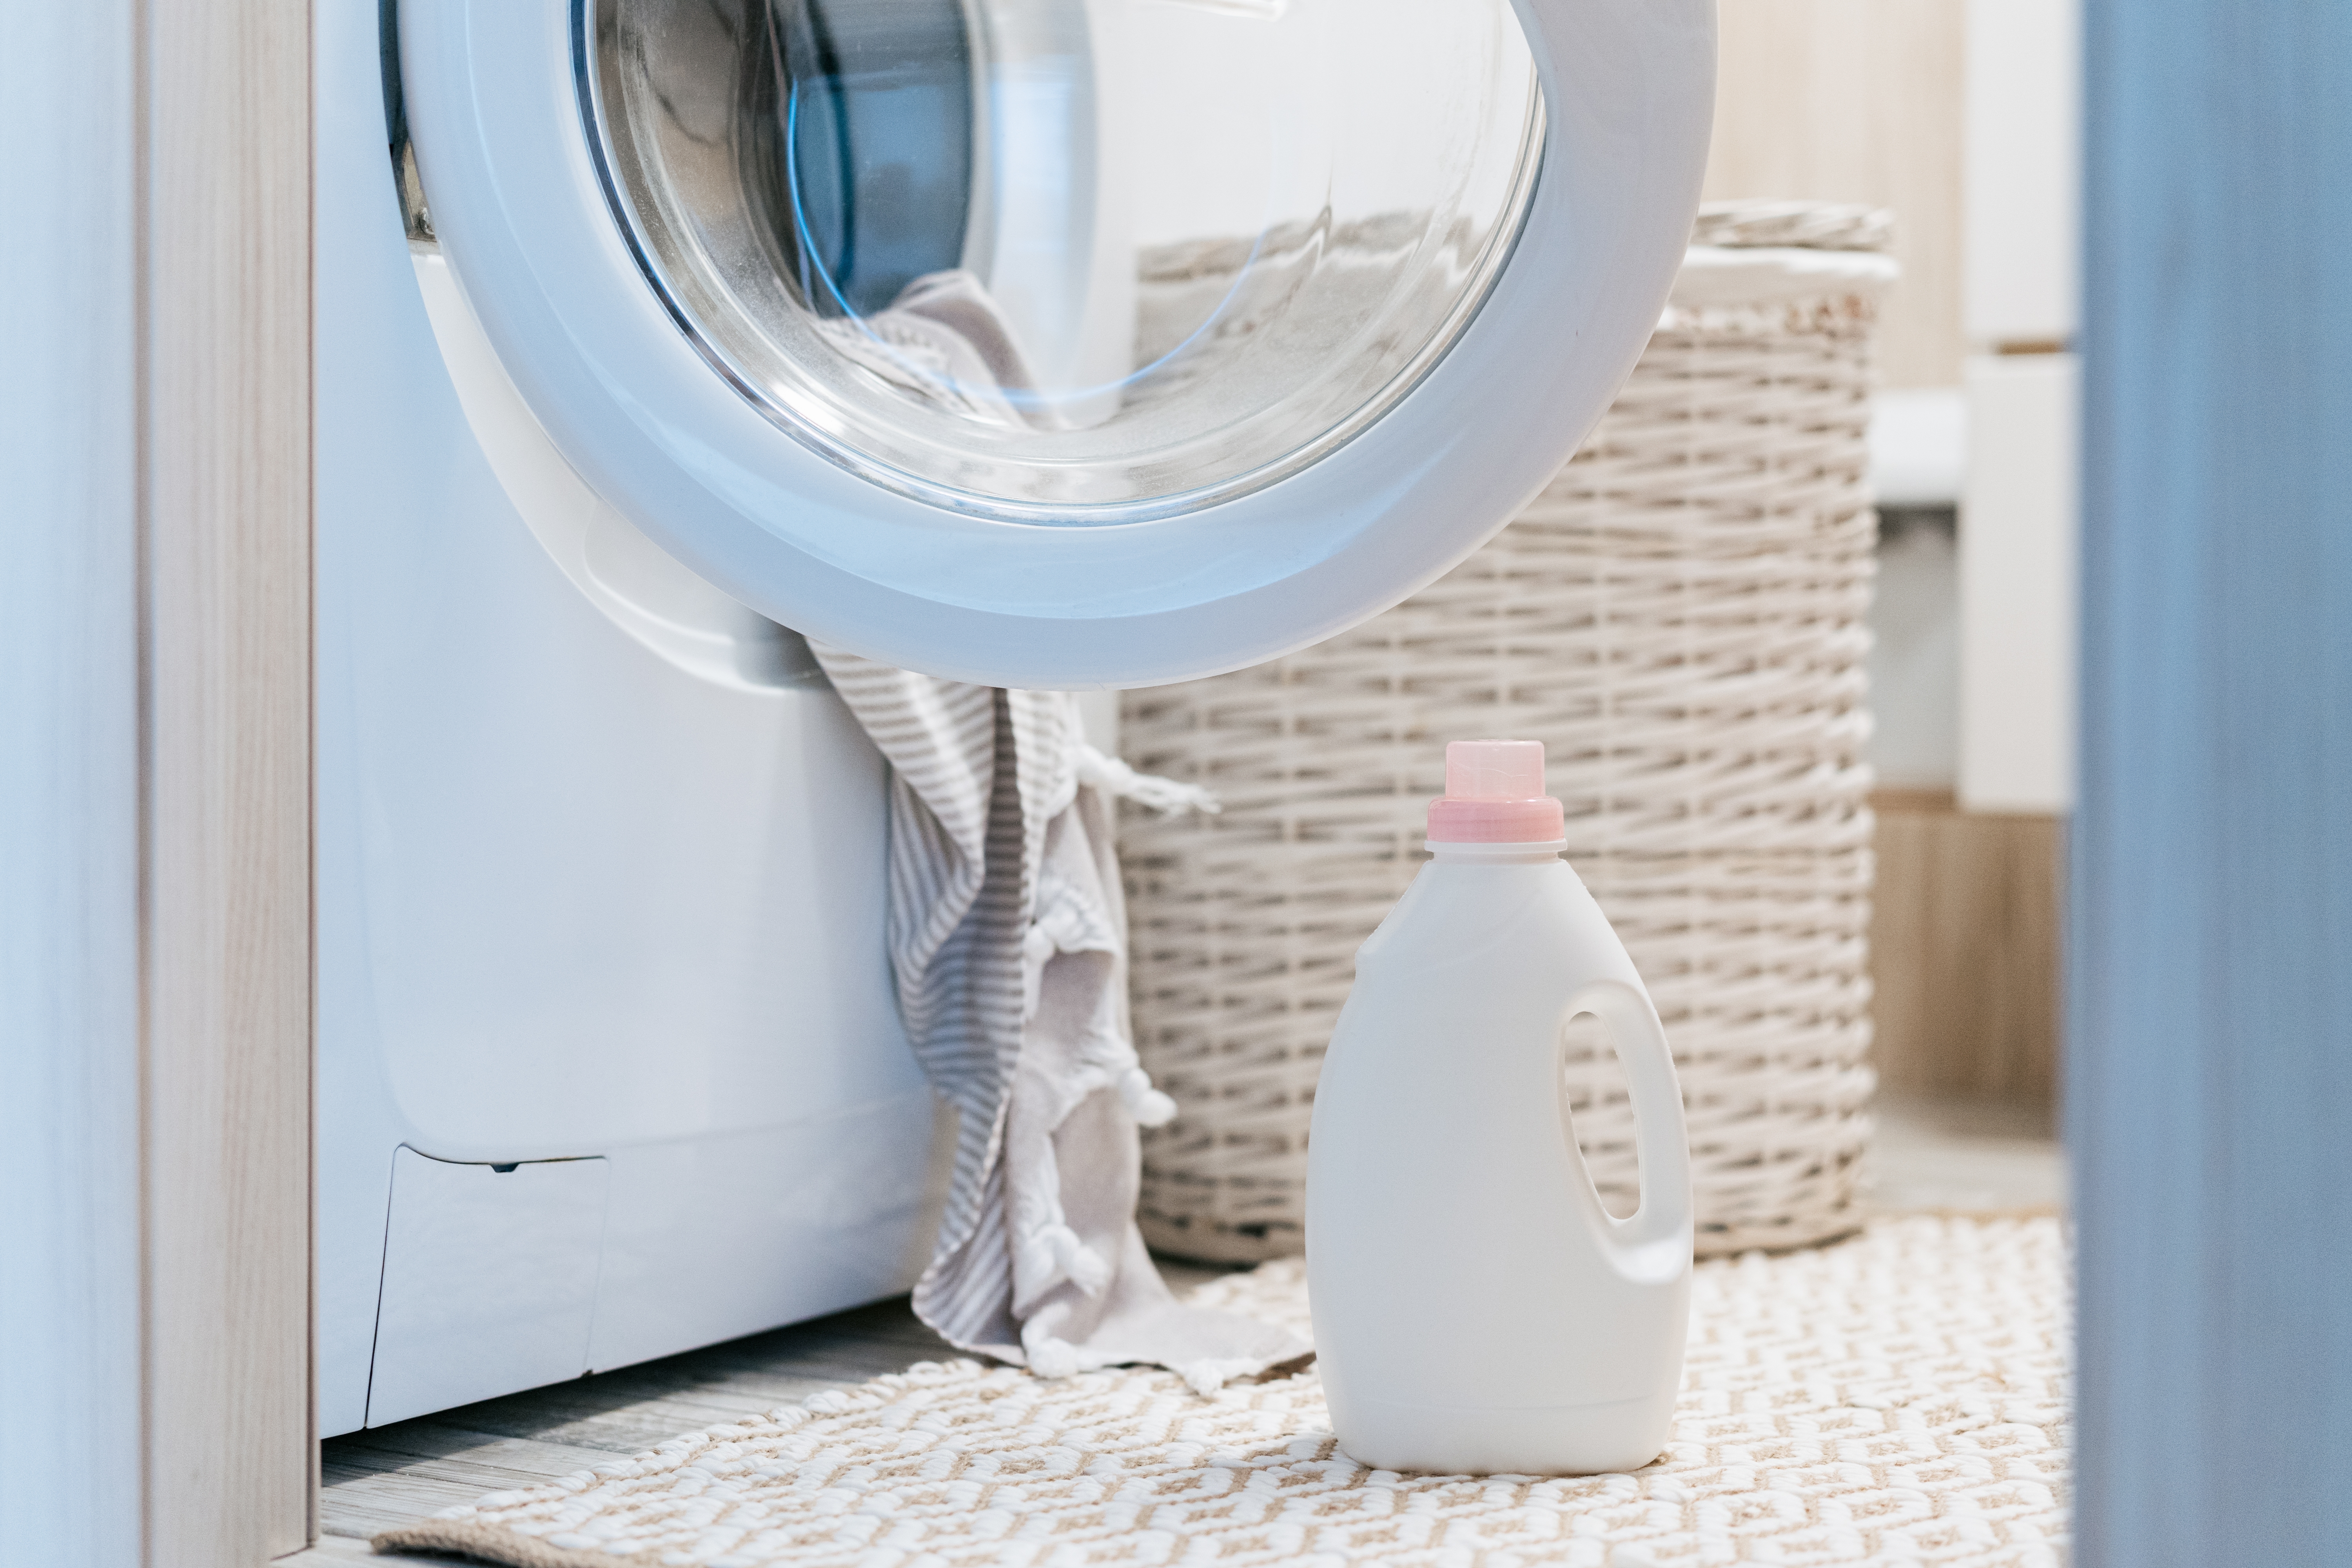 Using harsh chemicals may pose a risk to the fibers and colors of your Mexican blanket, so it is advisable to opt for a gentle detergent. | Source: Shutterstock